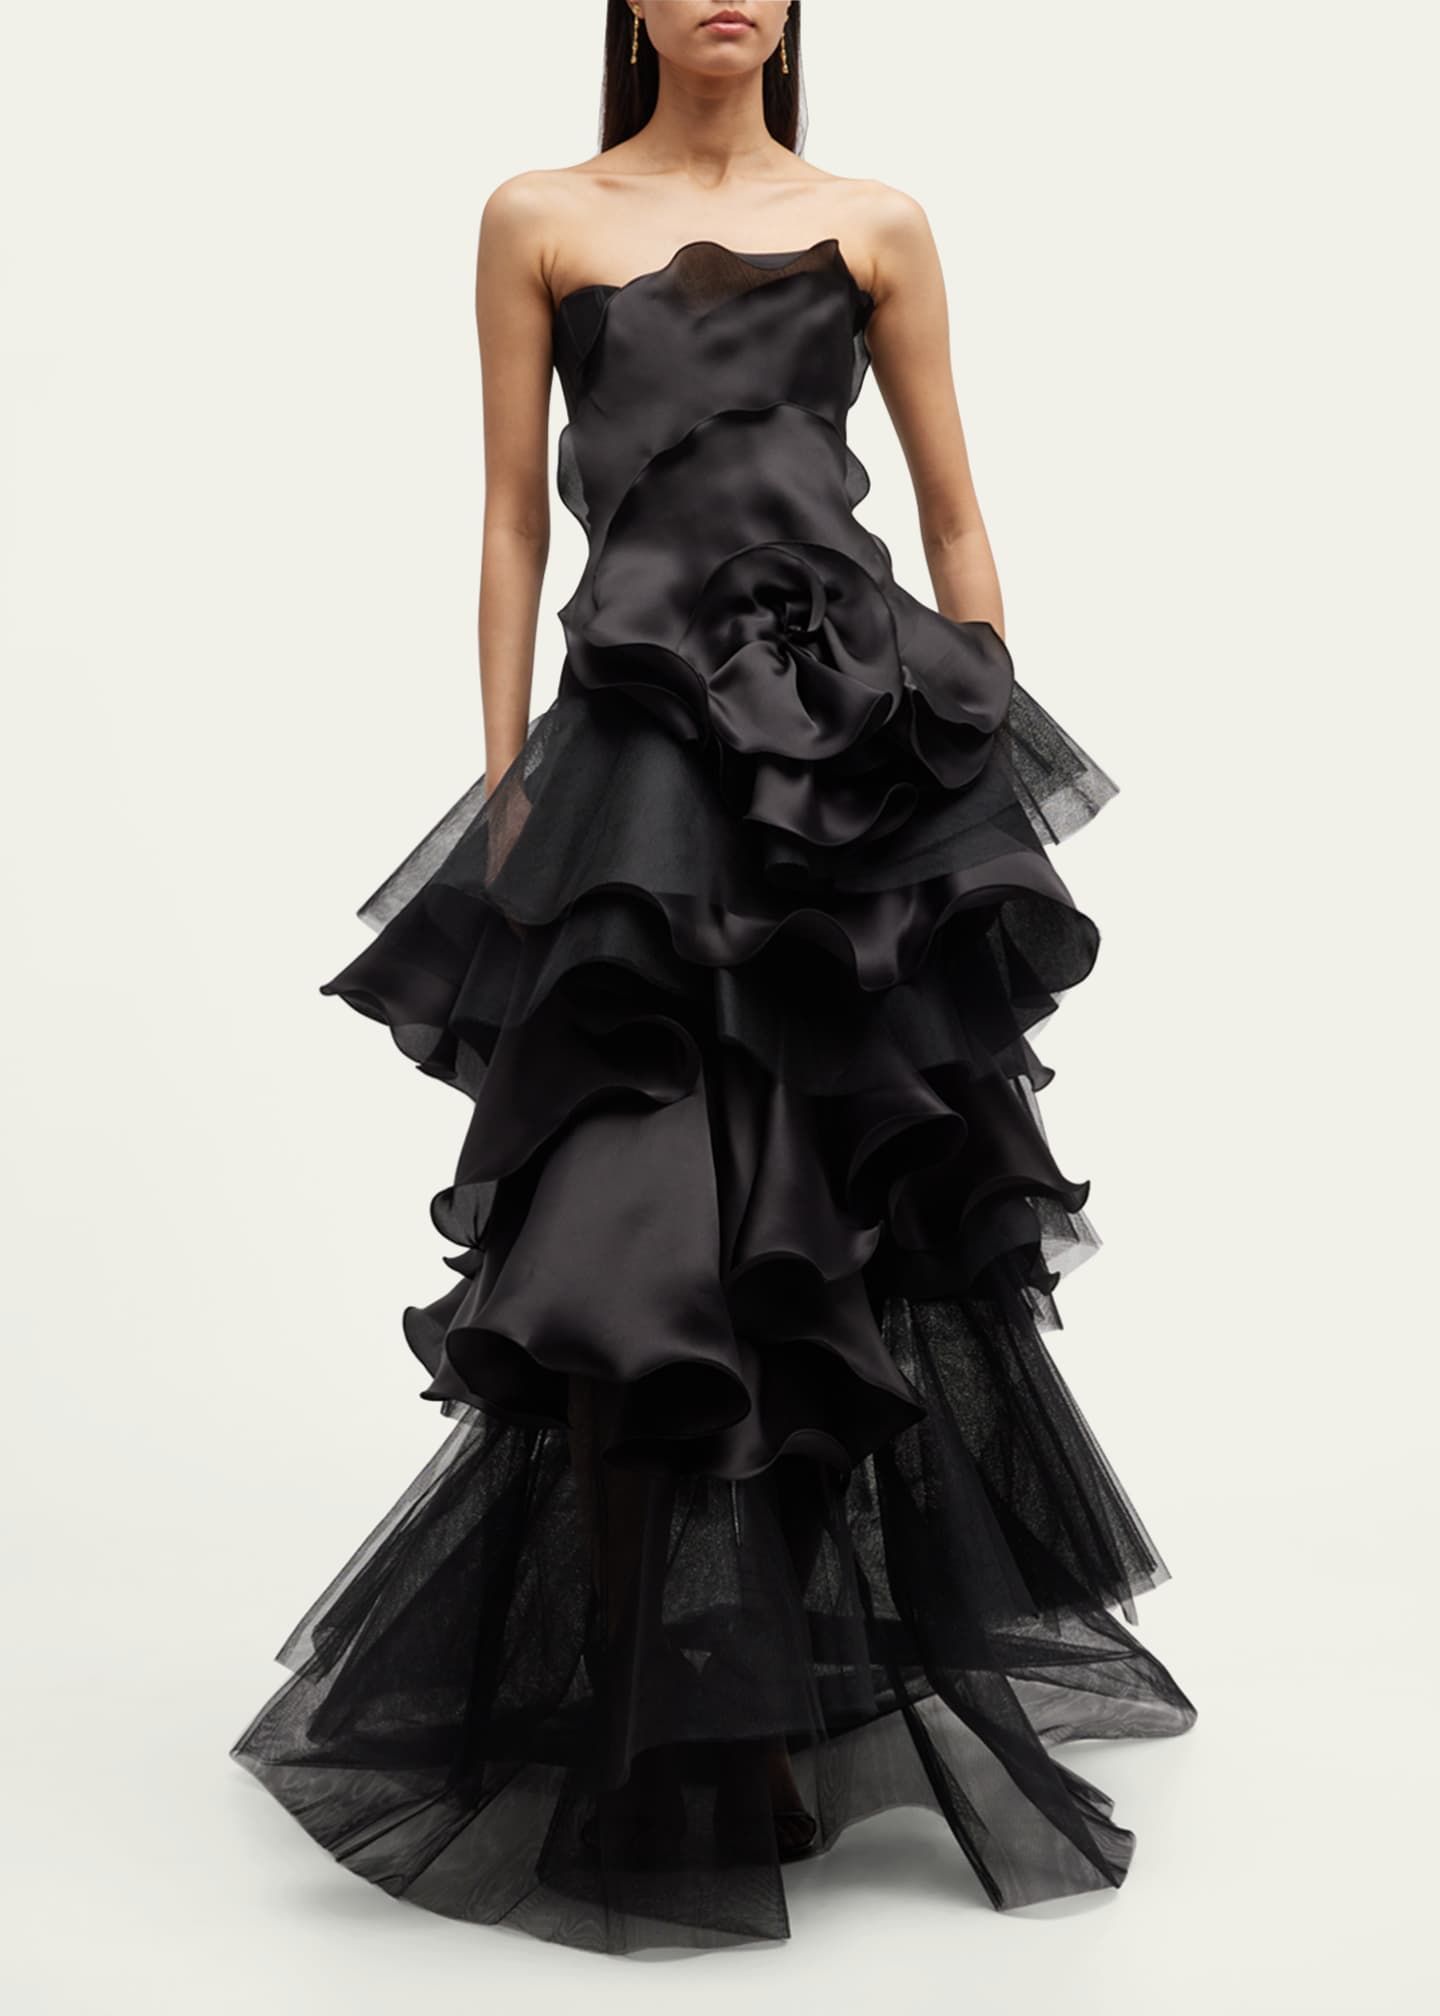 Marchesa Tiered Column Gown with Satin-Faced Rose Detail - Bergdorf Goodman